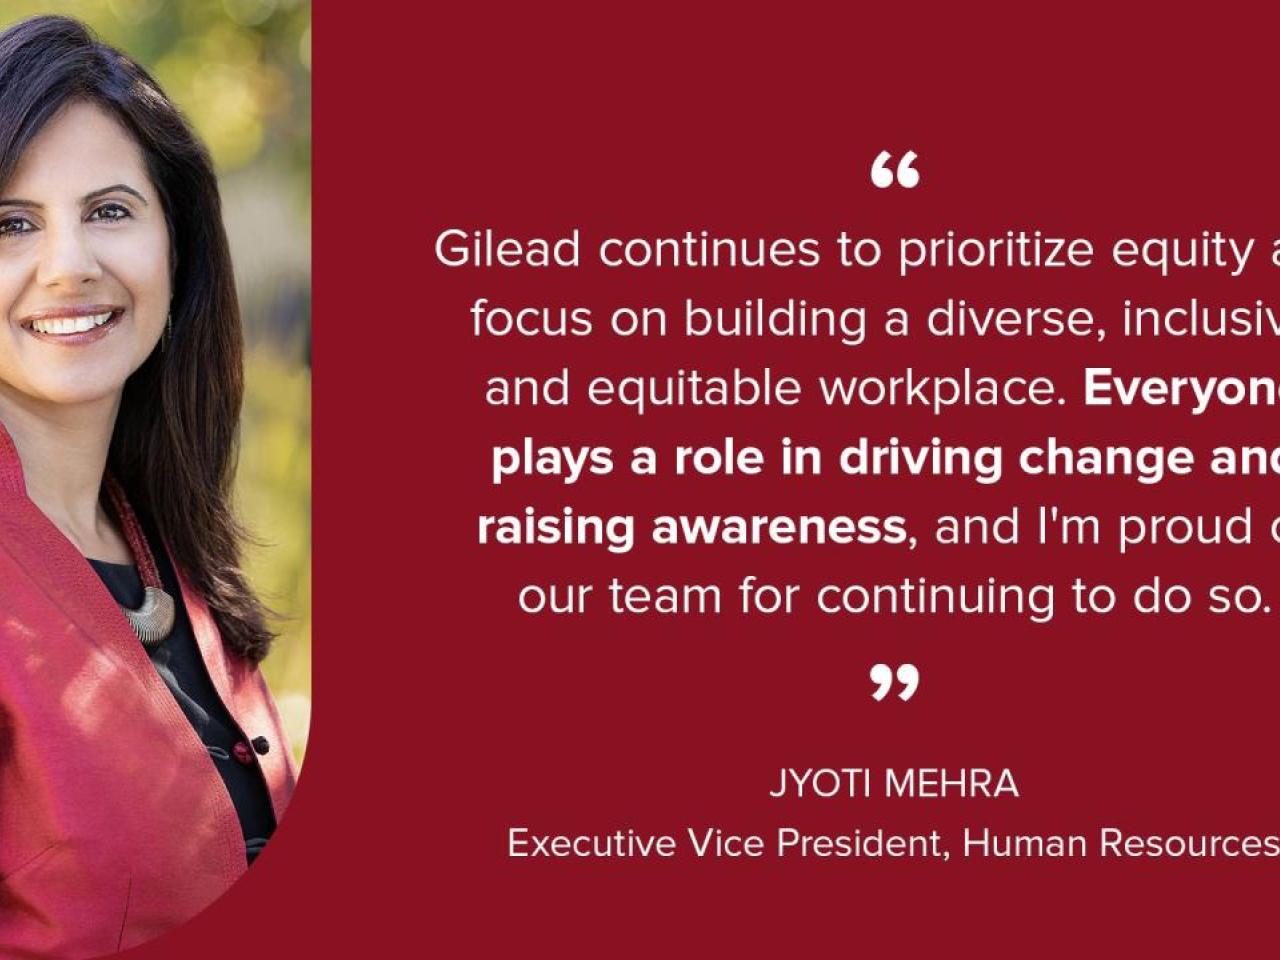 "Gilead continues to prioritize equity and focus on building a diverse, inclusive and equitable workplace. Everyone plays a role in driving change and raising awareness, and I'm proud of our team for continuing to do so."